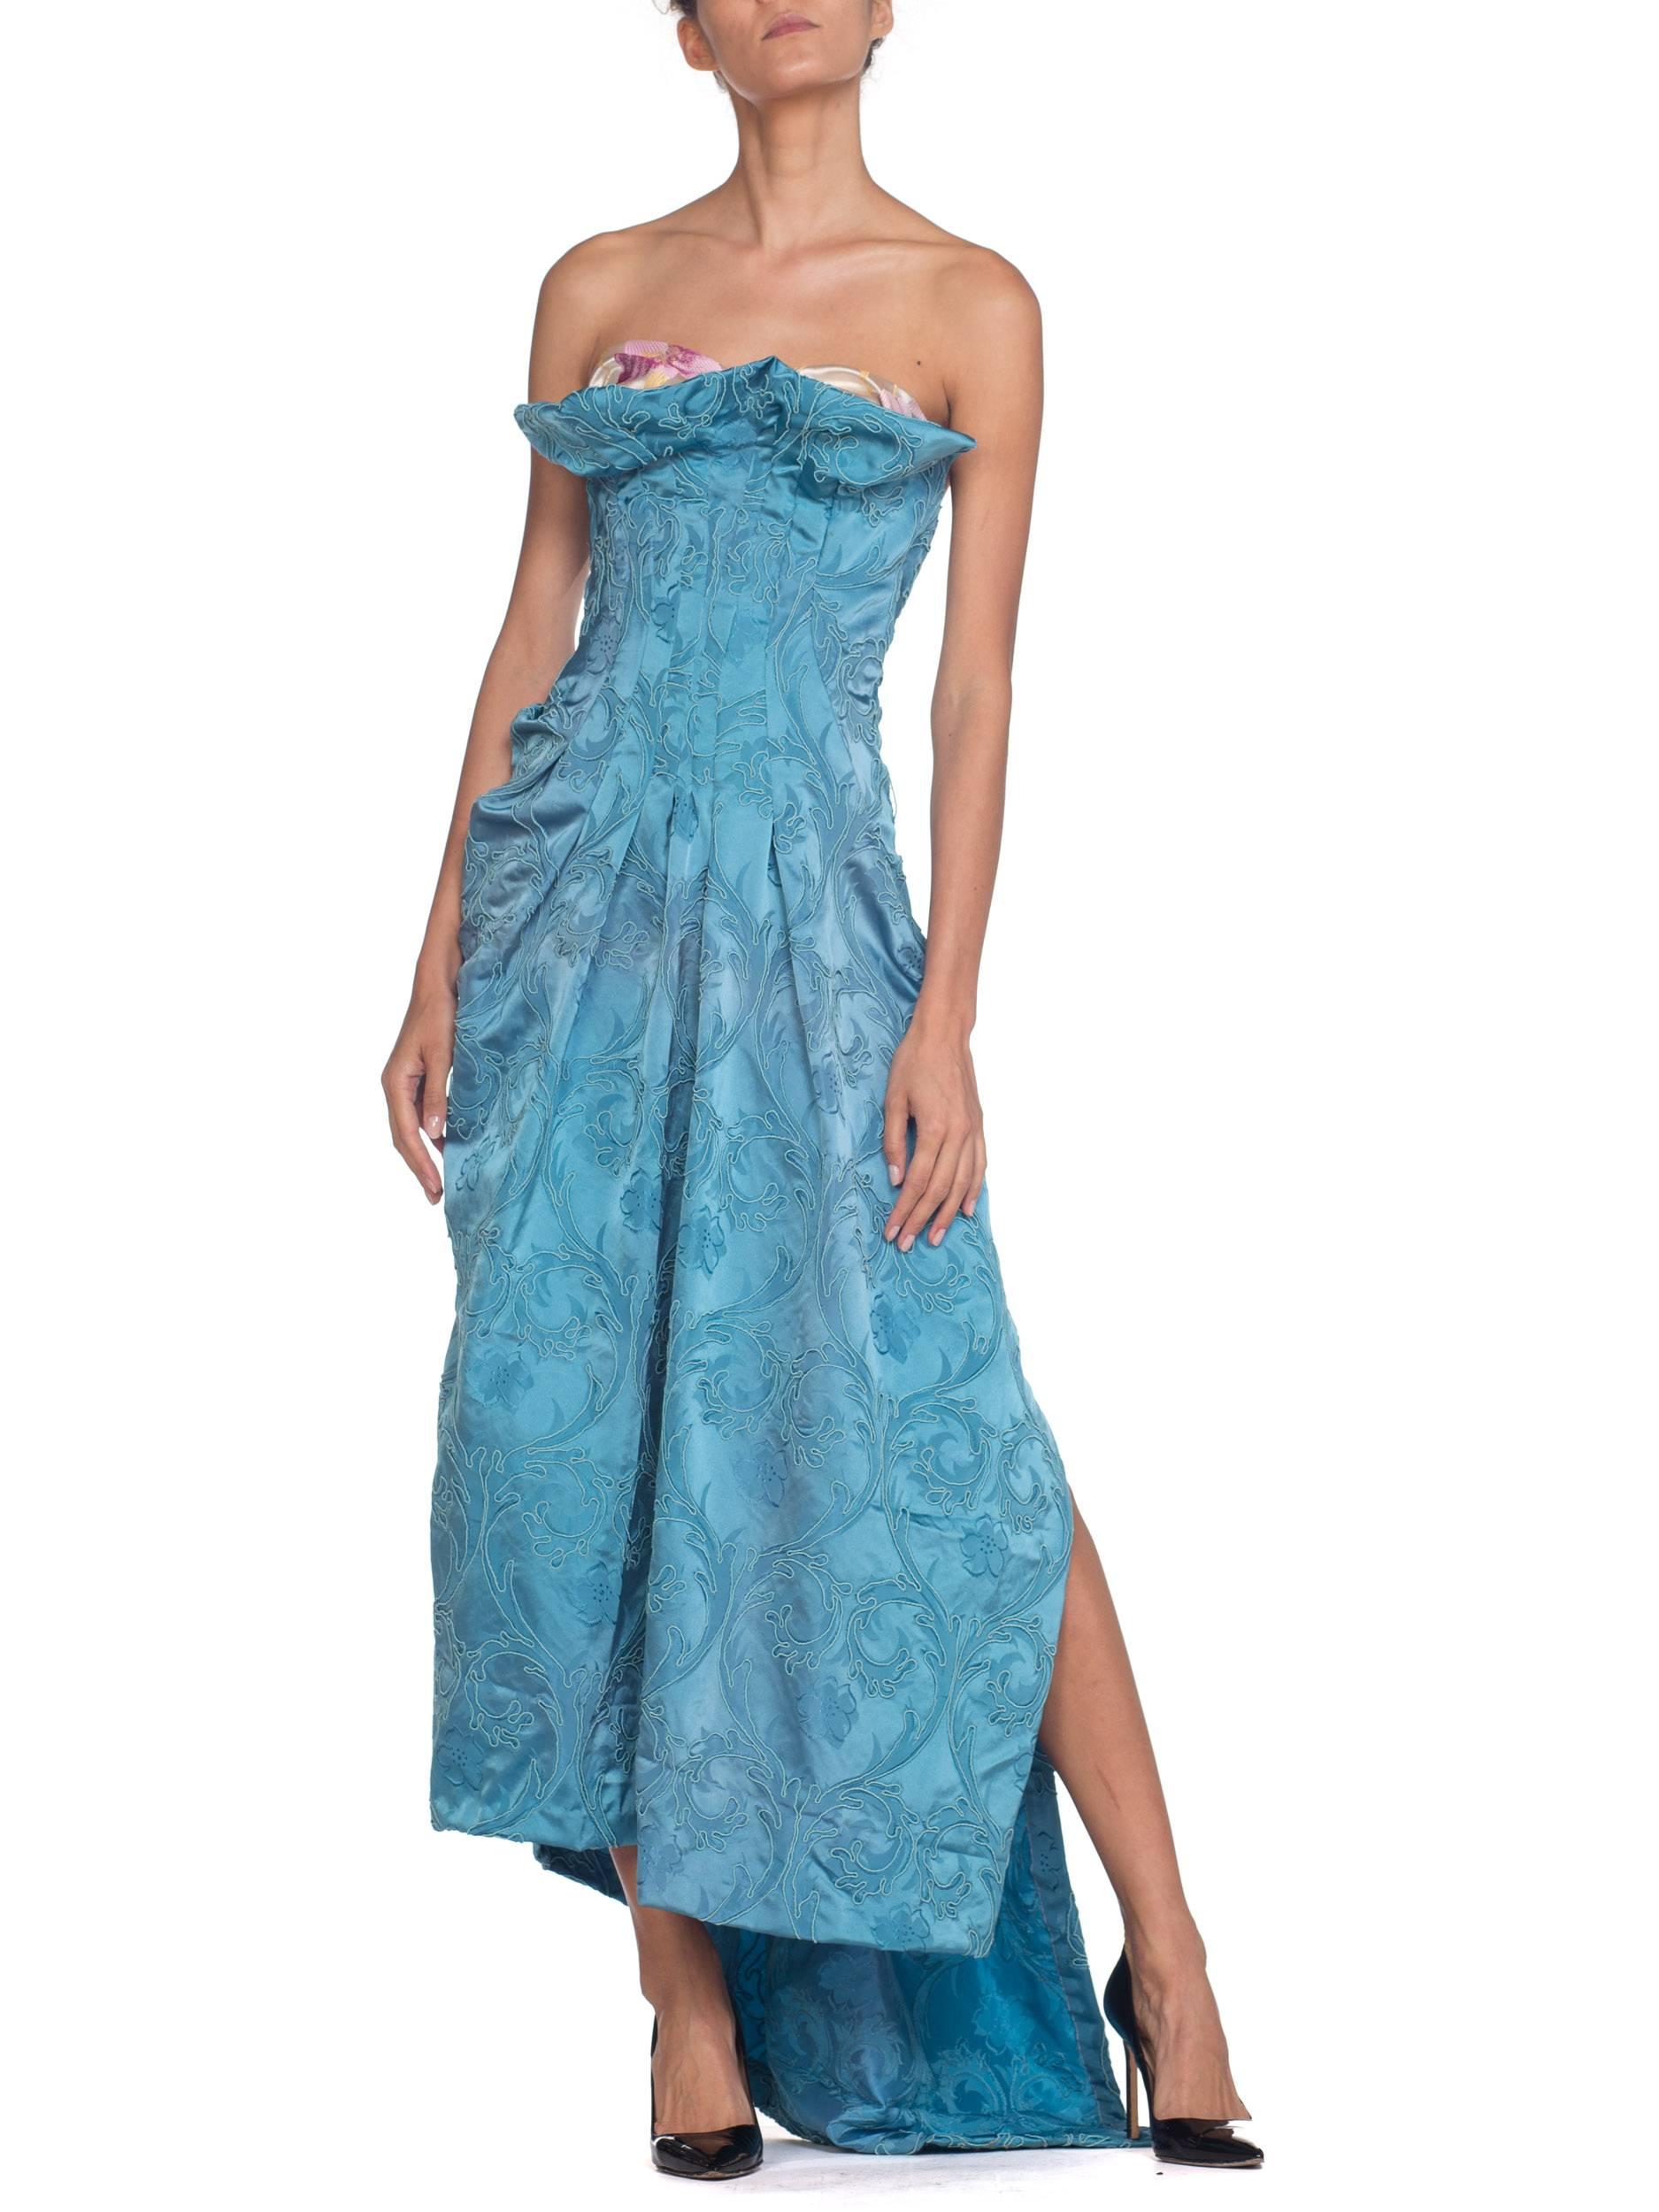 MORPHEW COLLECTION Aquamarine Blue Rayon & Silk Damask Strapless Asymmetrical G For Sale 3